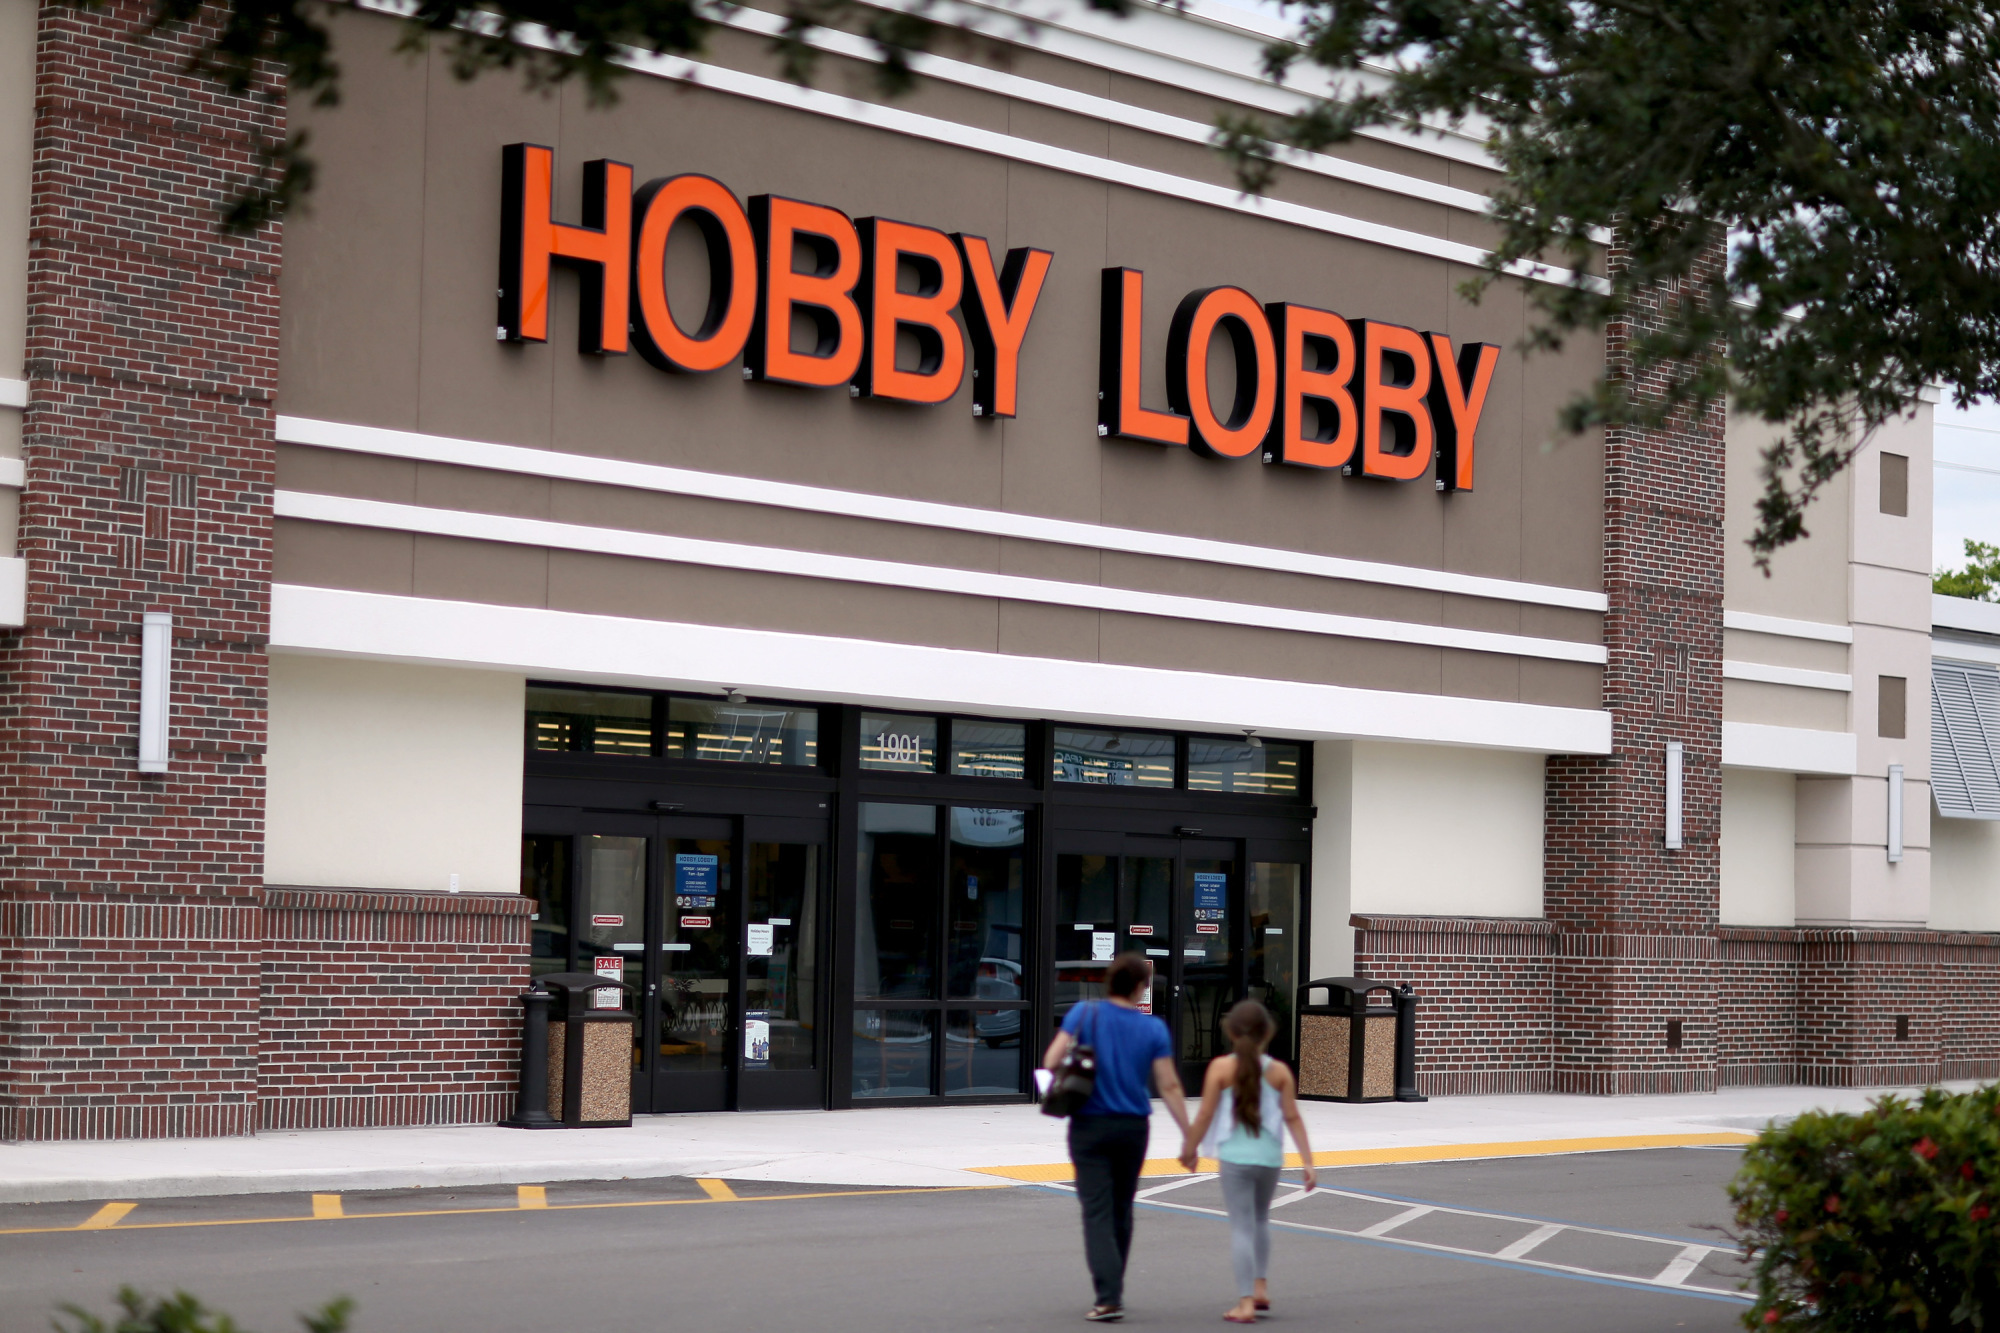 Hobby Lobby Pay Minimum Wage Is 18.50 an Hour Starting Jan. 1 at All